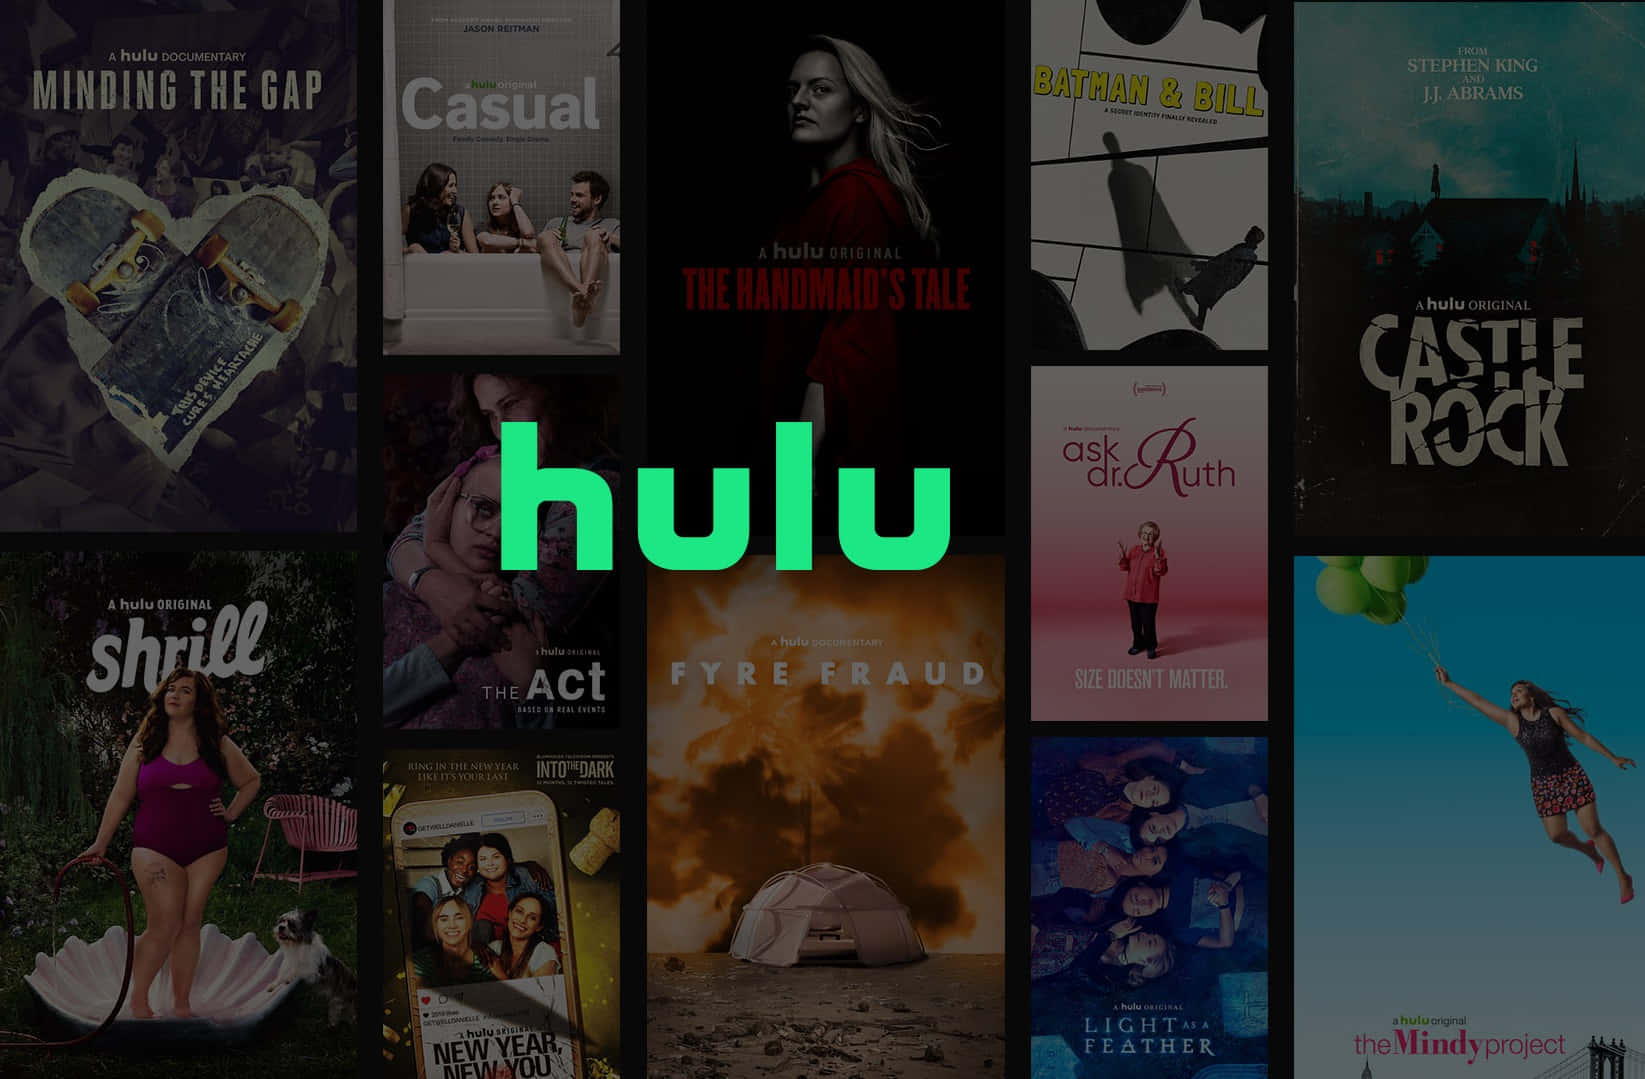 Tune in to Hulu for the latest movies and shows